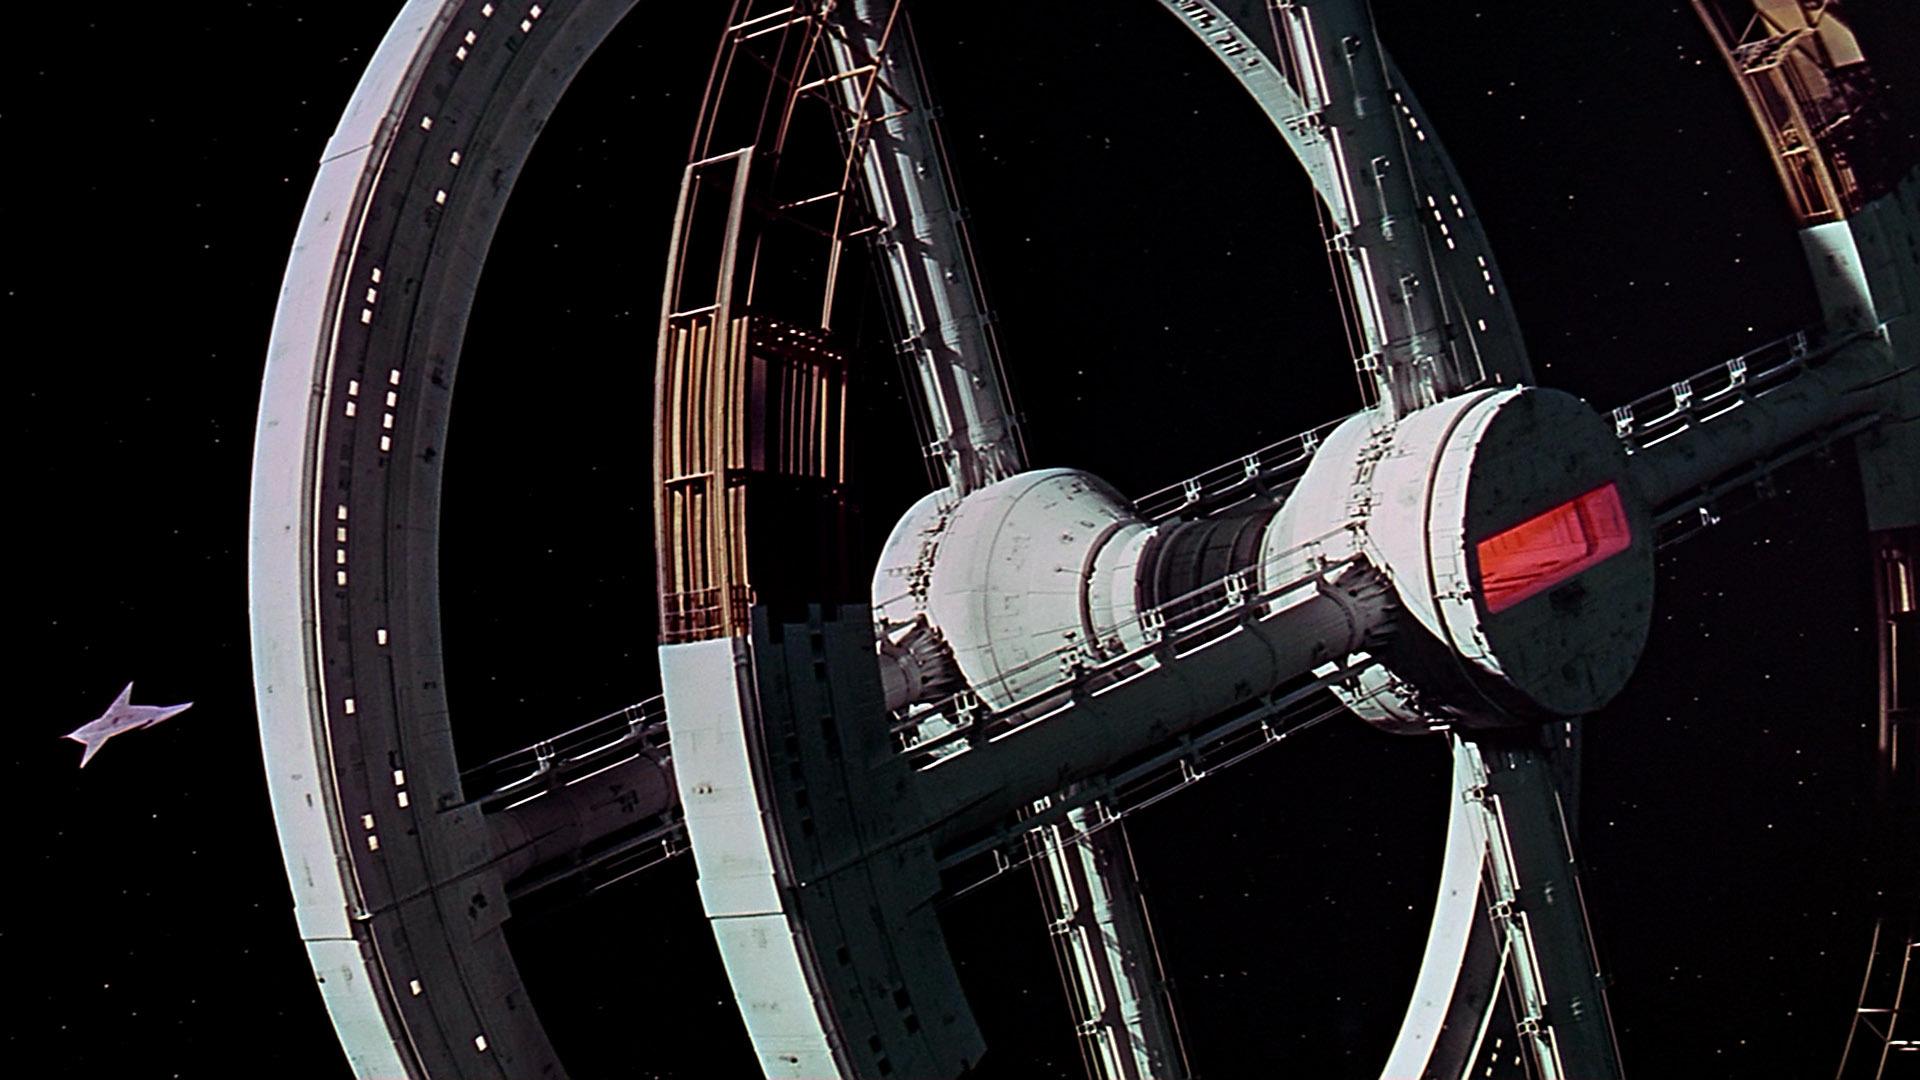 2001: A Space Odyssey HD Wallpaper. Background Imagex1080